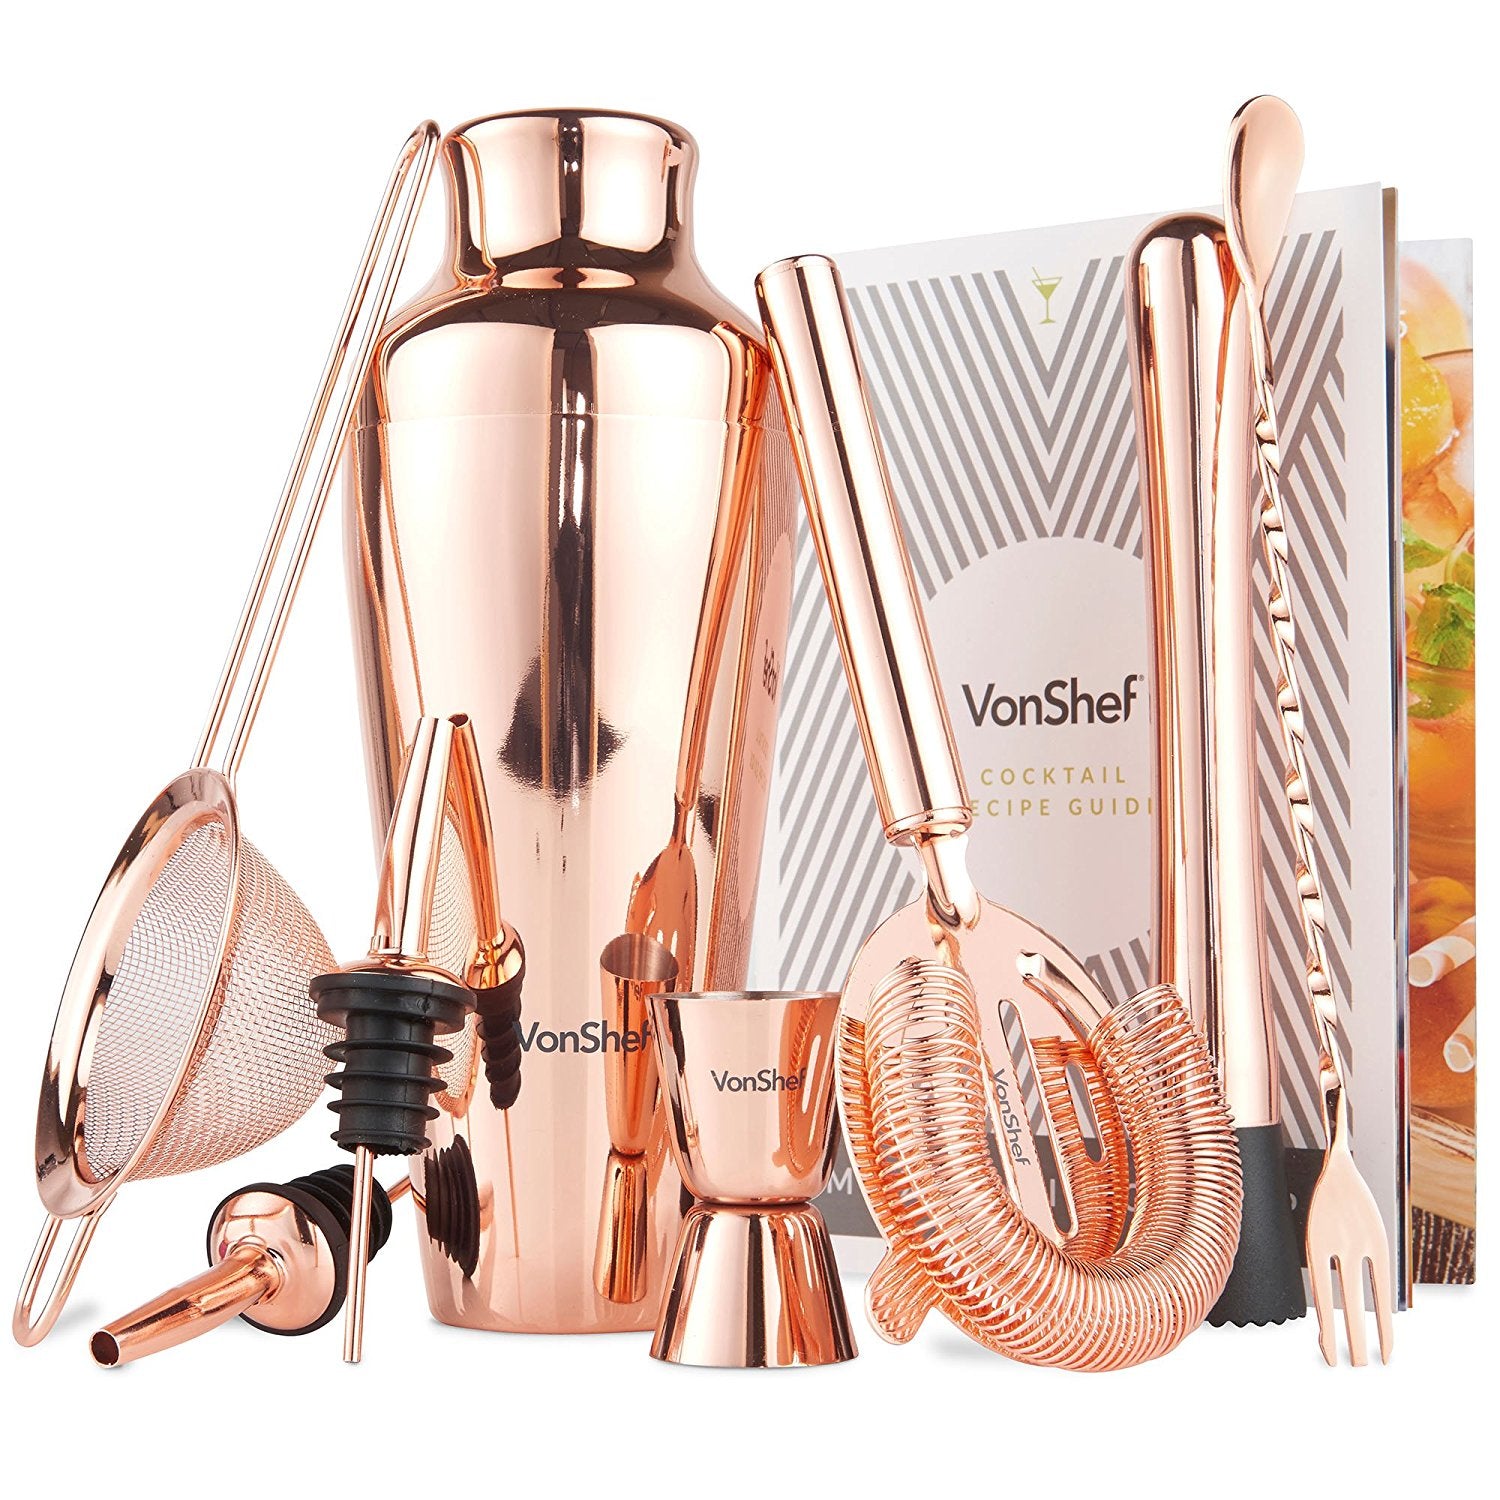 VonShef Premium Parisian Cocktail Shaker Barware Set in Gift Box with Recipe Guide, Cocktail Strainers, Twisted Bar Spoon, Jigger, Muddler and Pourers